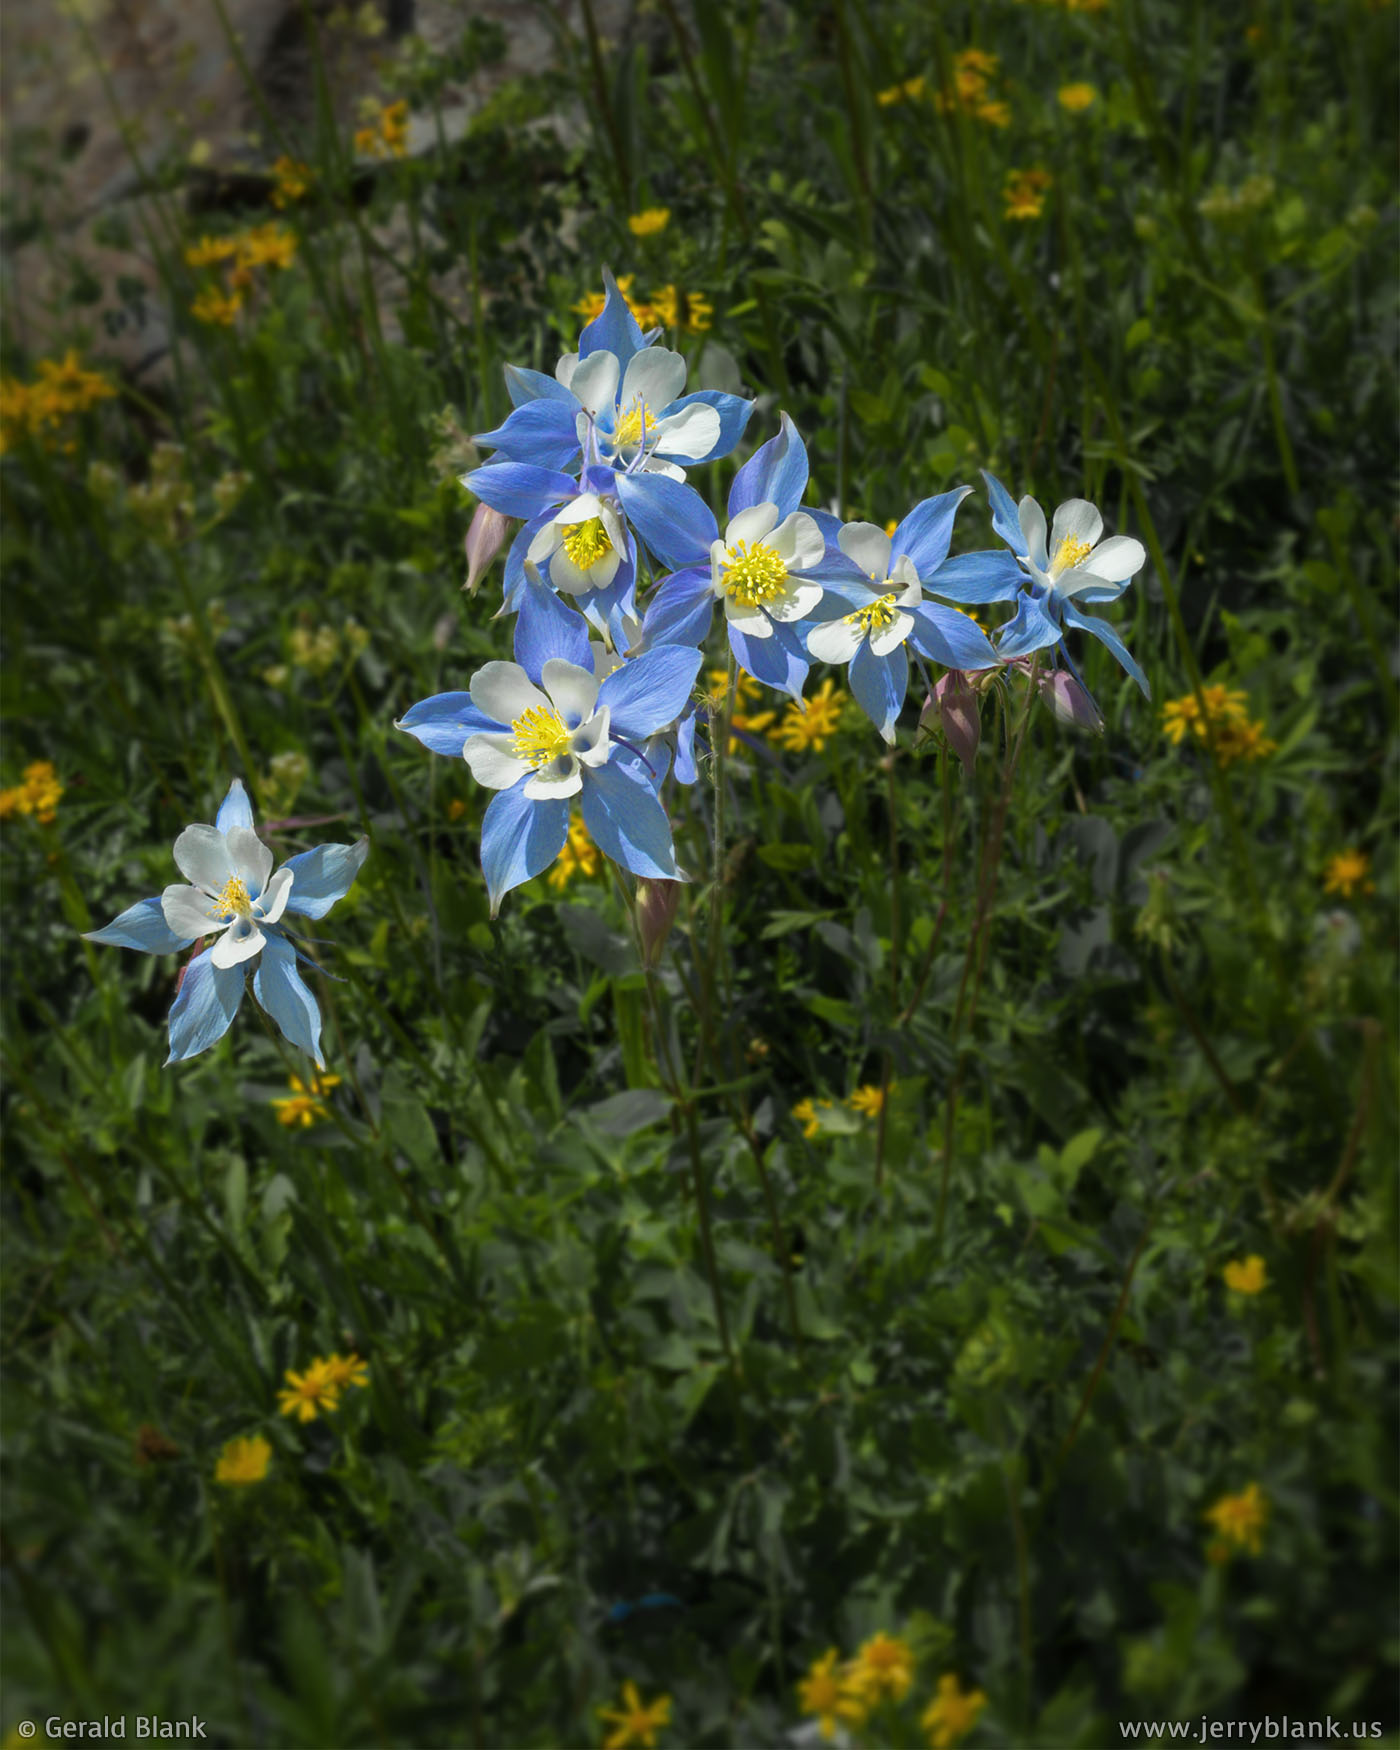 #59932 - Rocky Mountain columbines (Aquilegia coerulea) abound in the summer, above Stillwater Reservoir in the Flat Tops National Wilderness Area in Colorado - photo by Jerry Blank